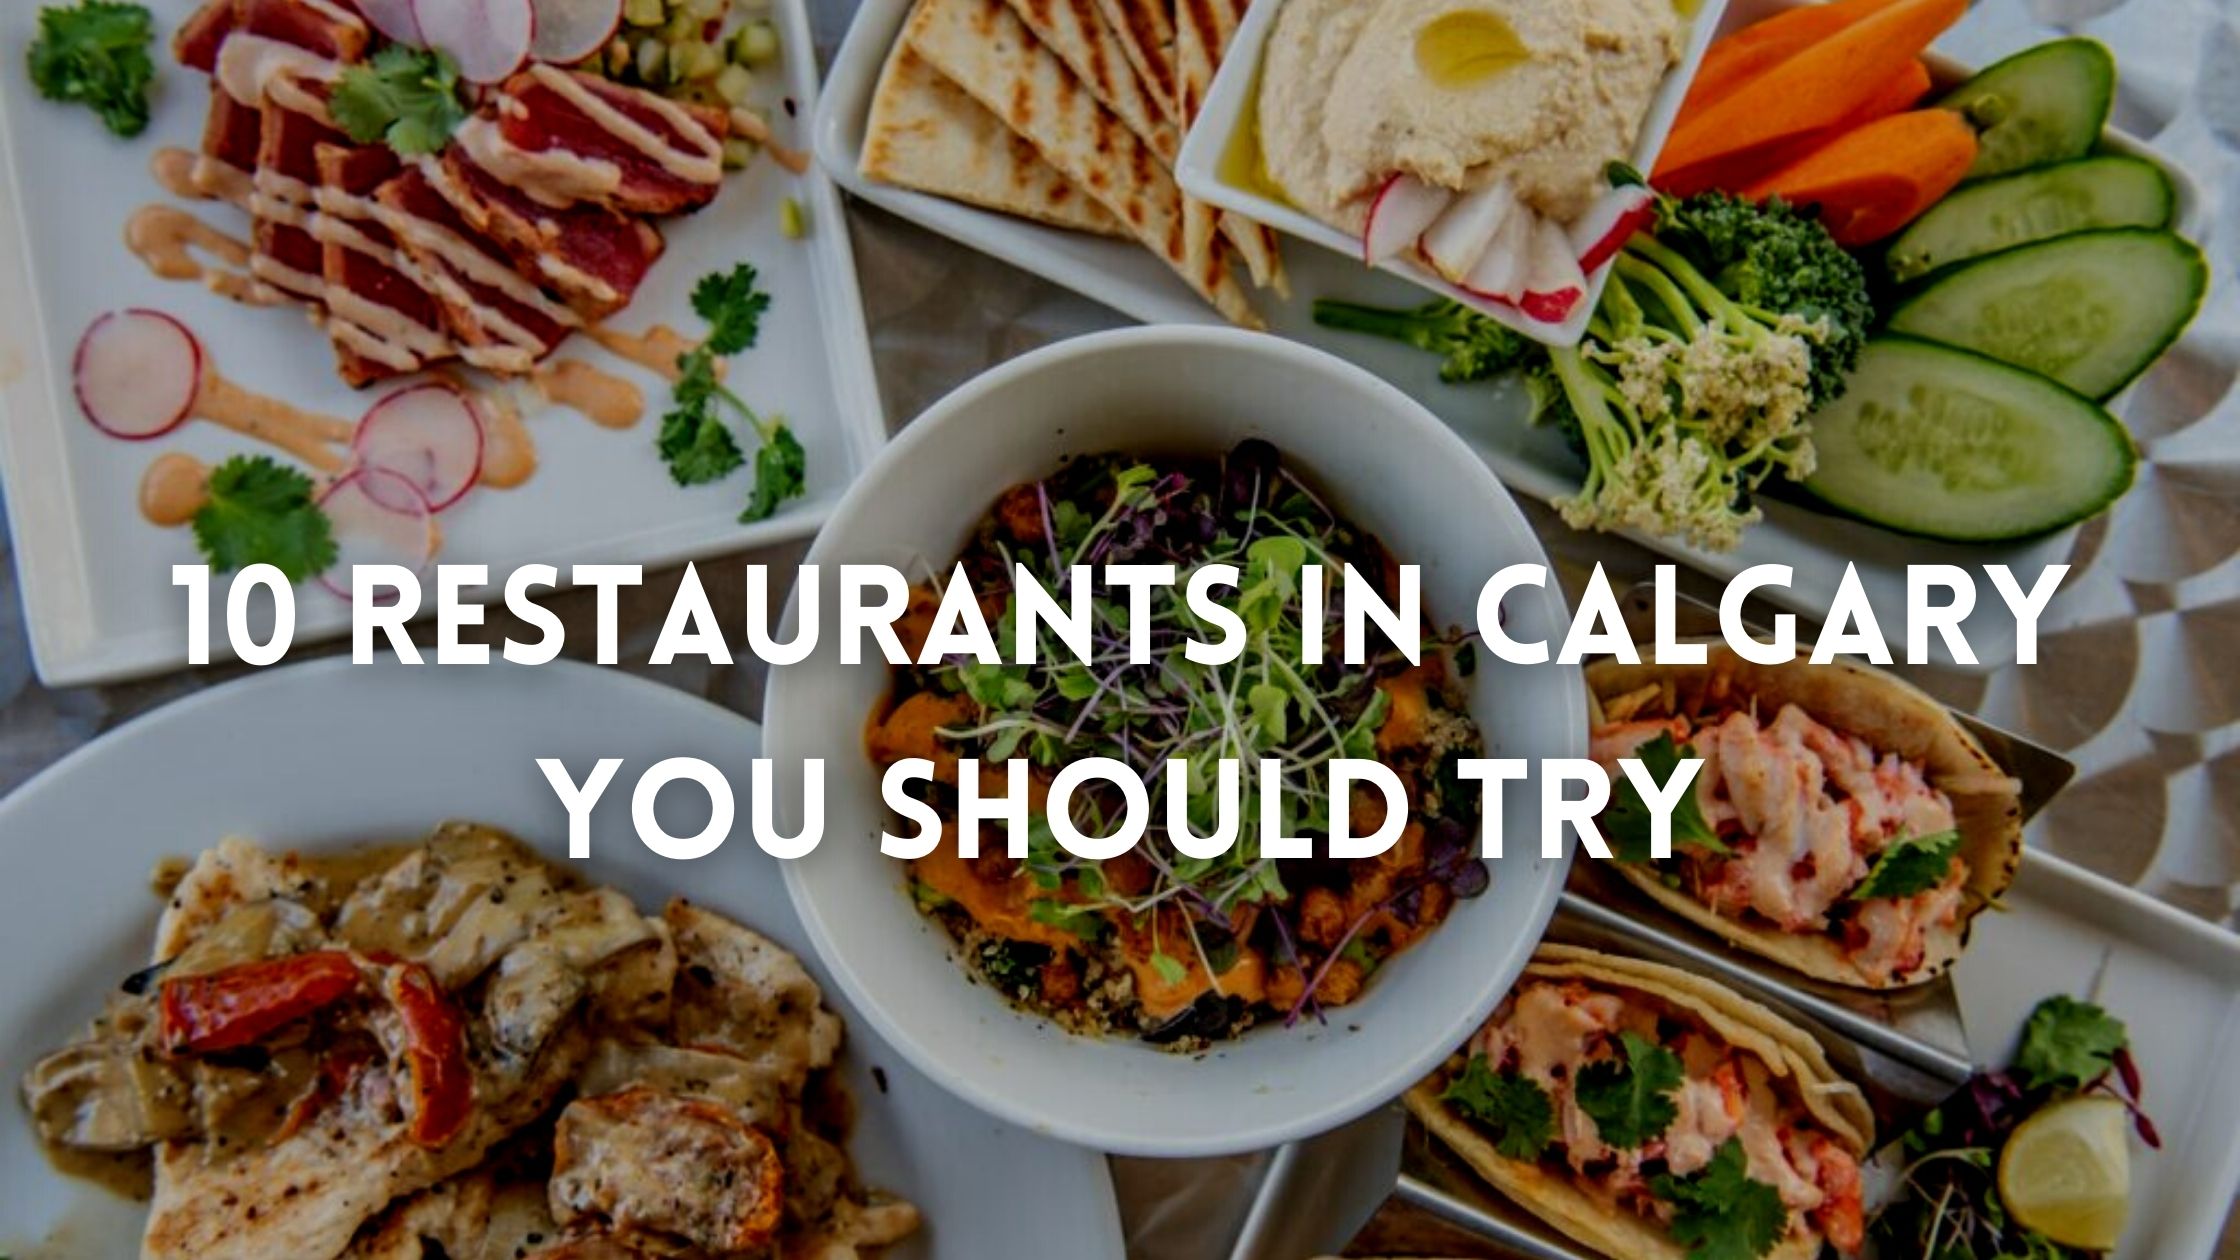 10 Restaurants in Calgary You Should Try